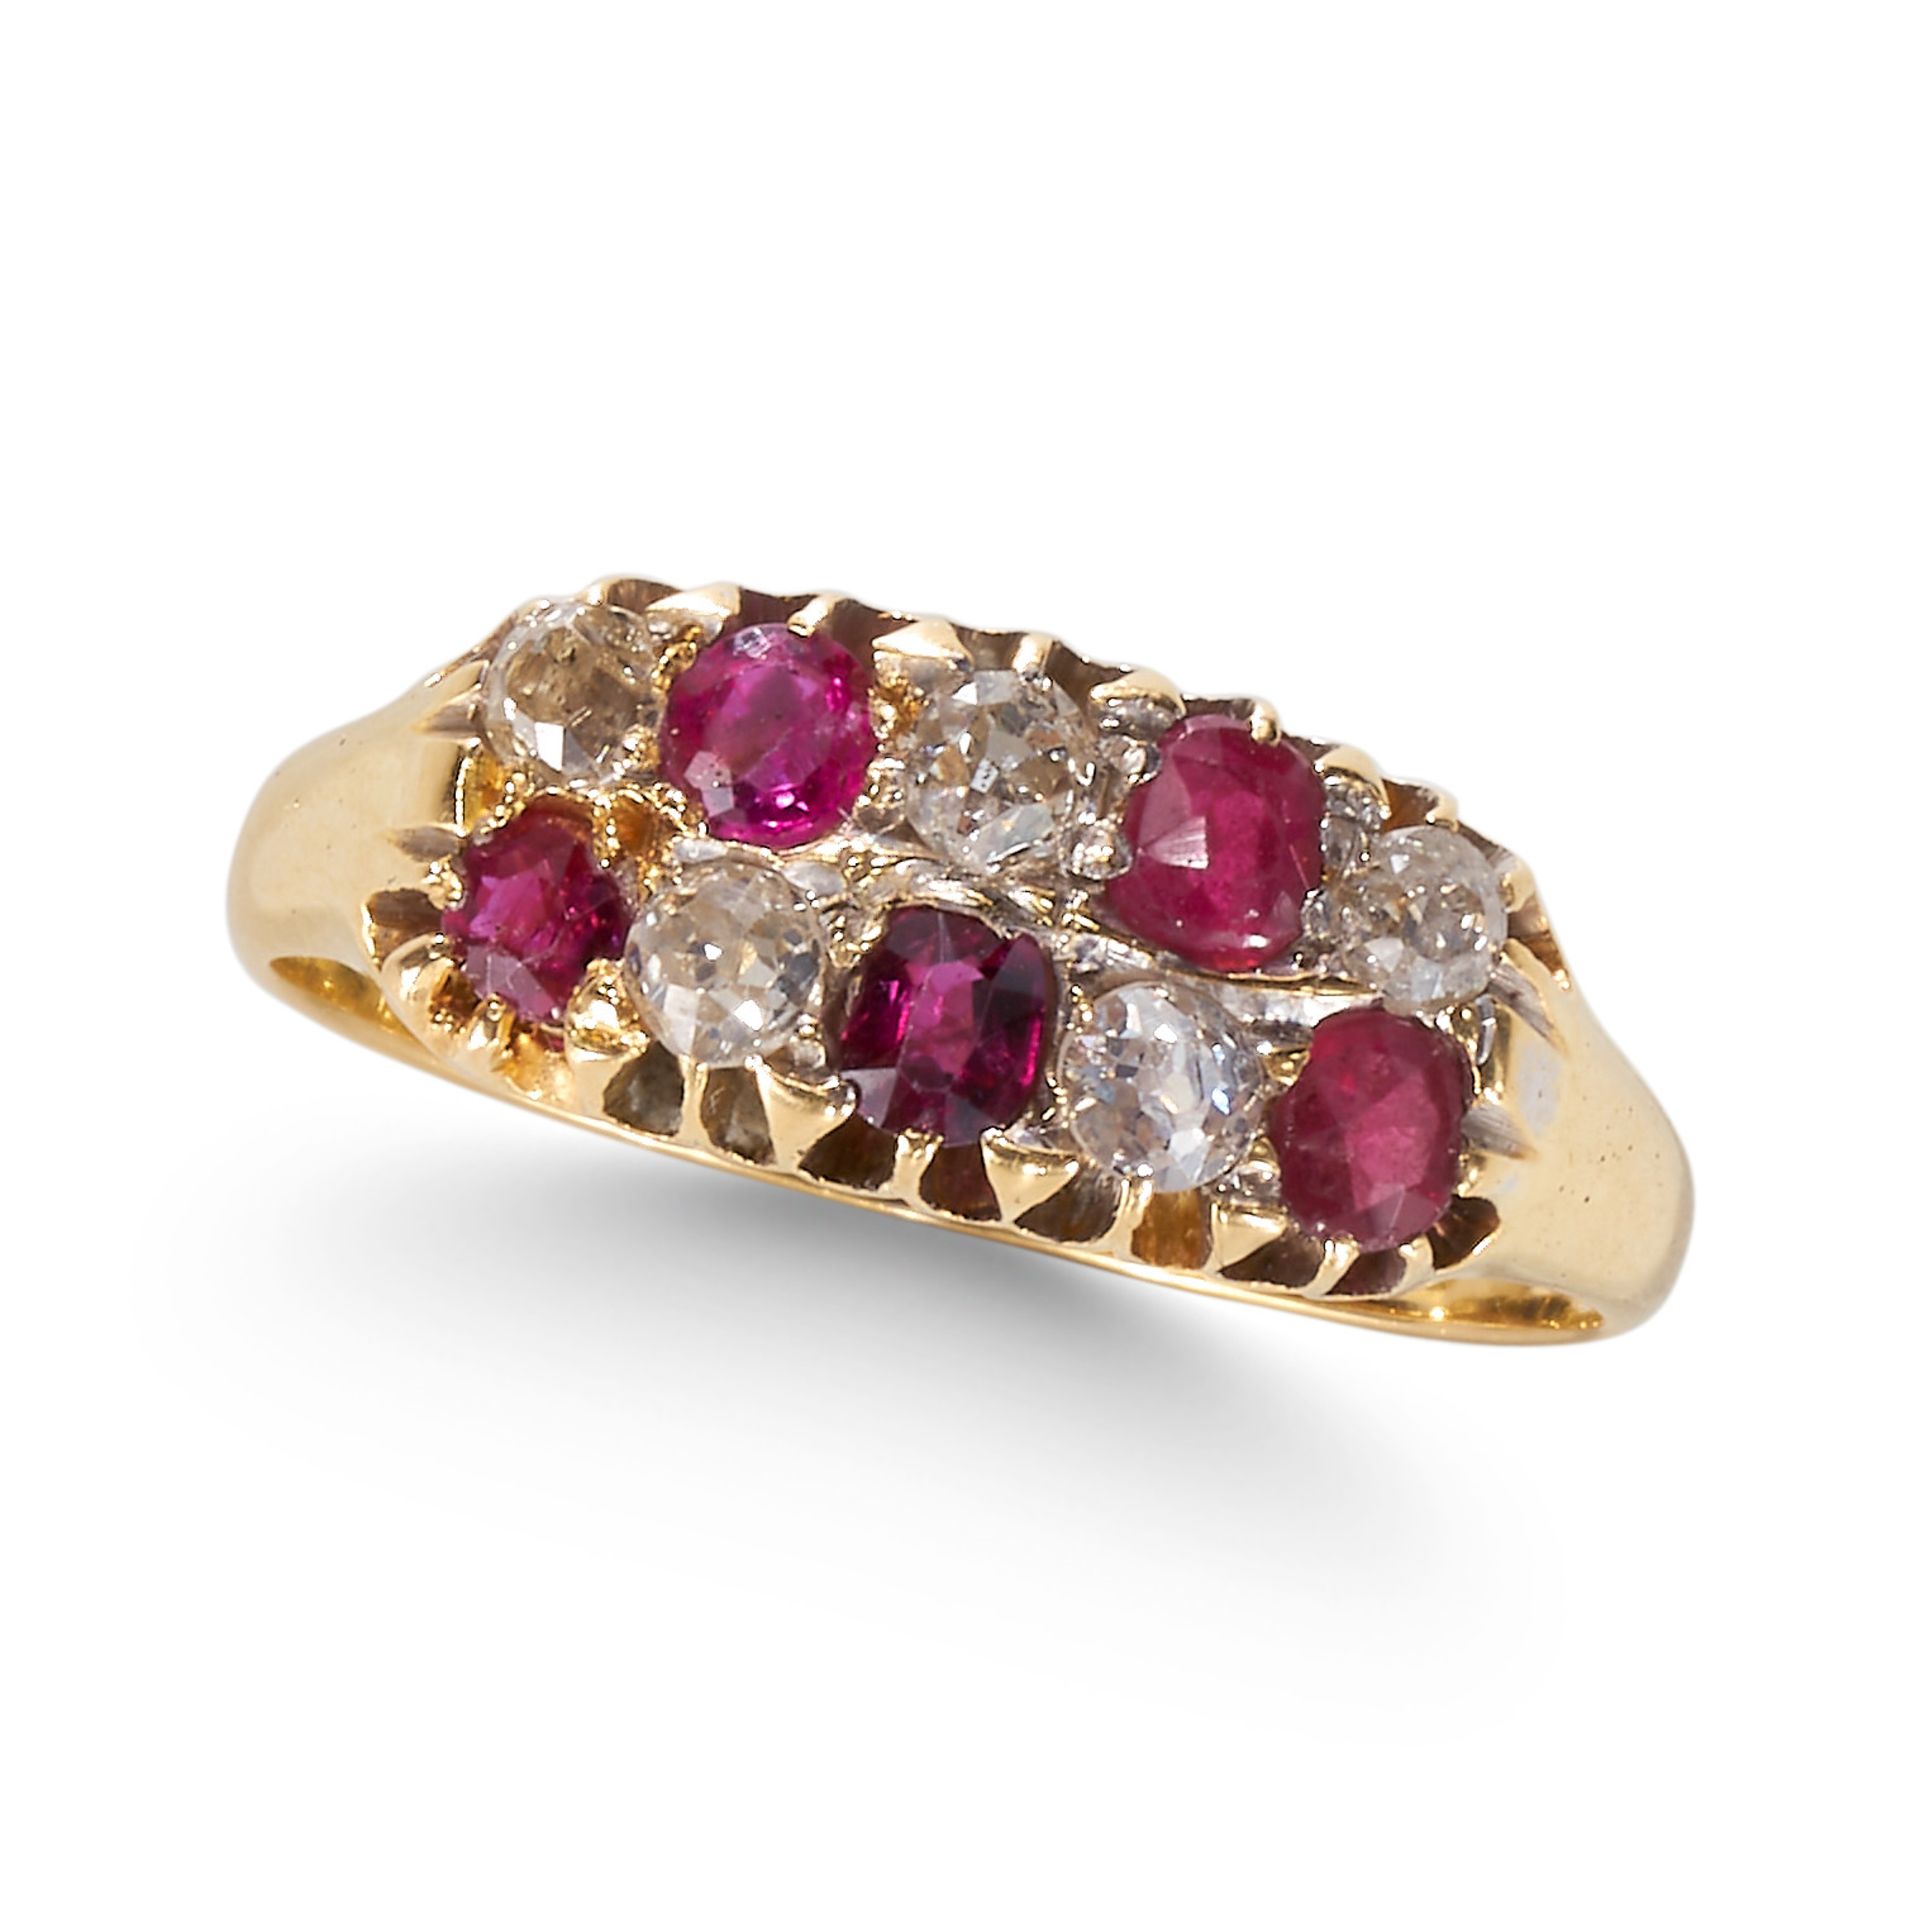 AN ANTIQUE VICTORIAN RUBY AND DIAMOND DOUBLE ROW RING, IN 18CT YELLOW GOLD.